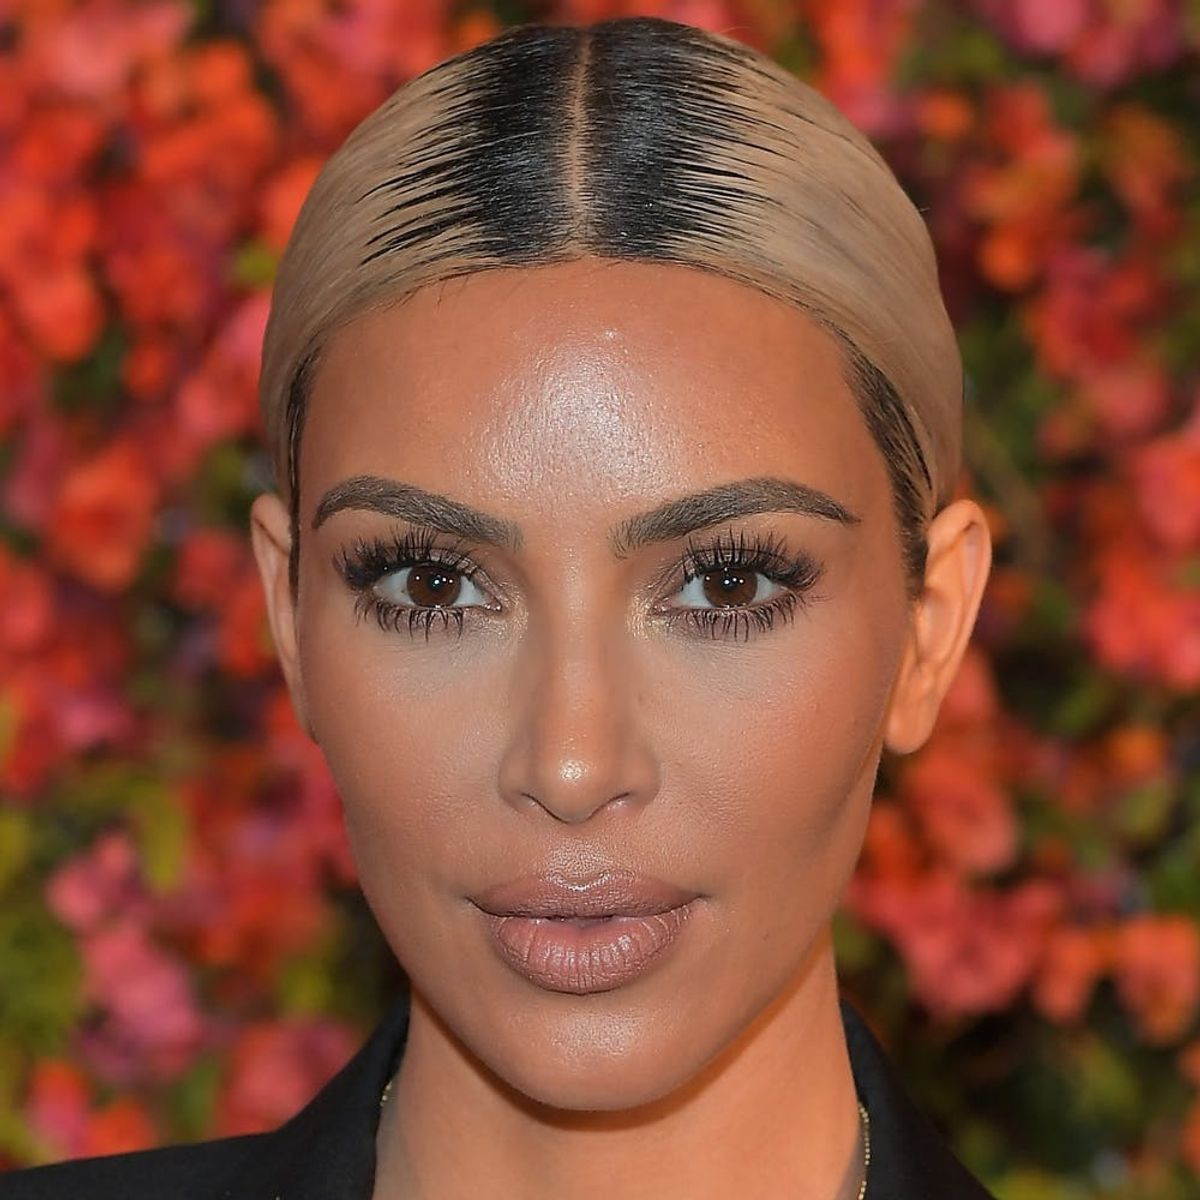 Kim Kardashian West Says She’s Reusing Old Baby Furniture for Chicago’s Nursery